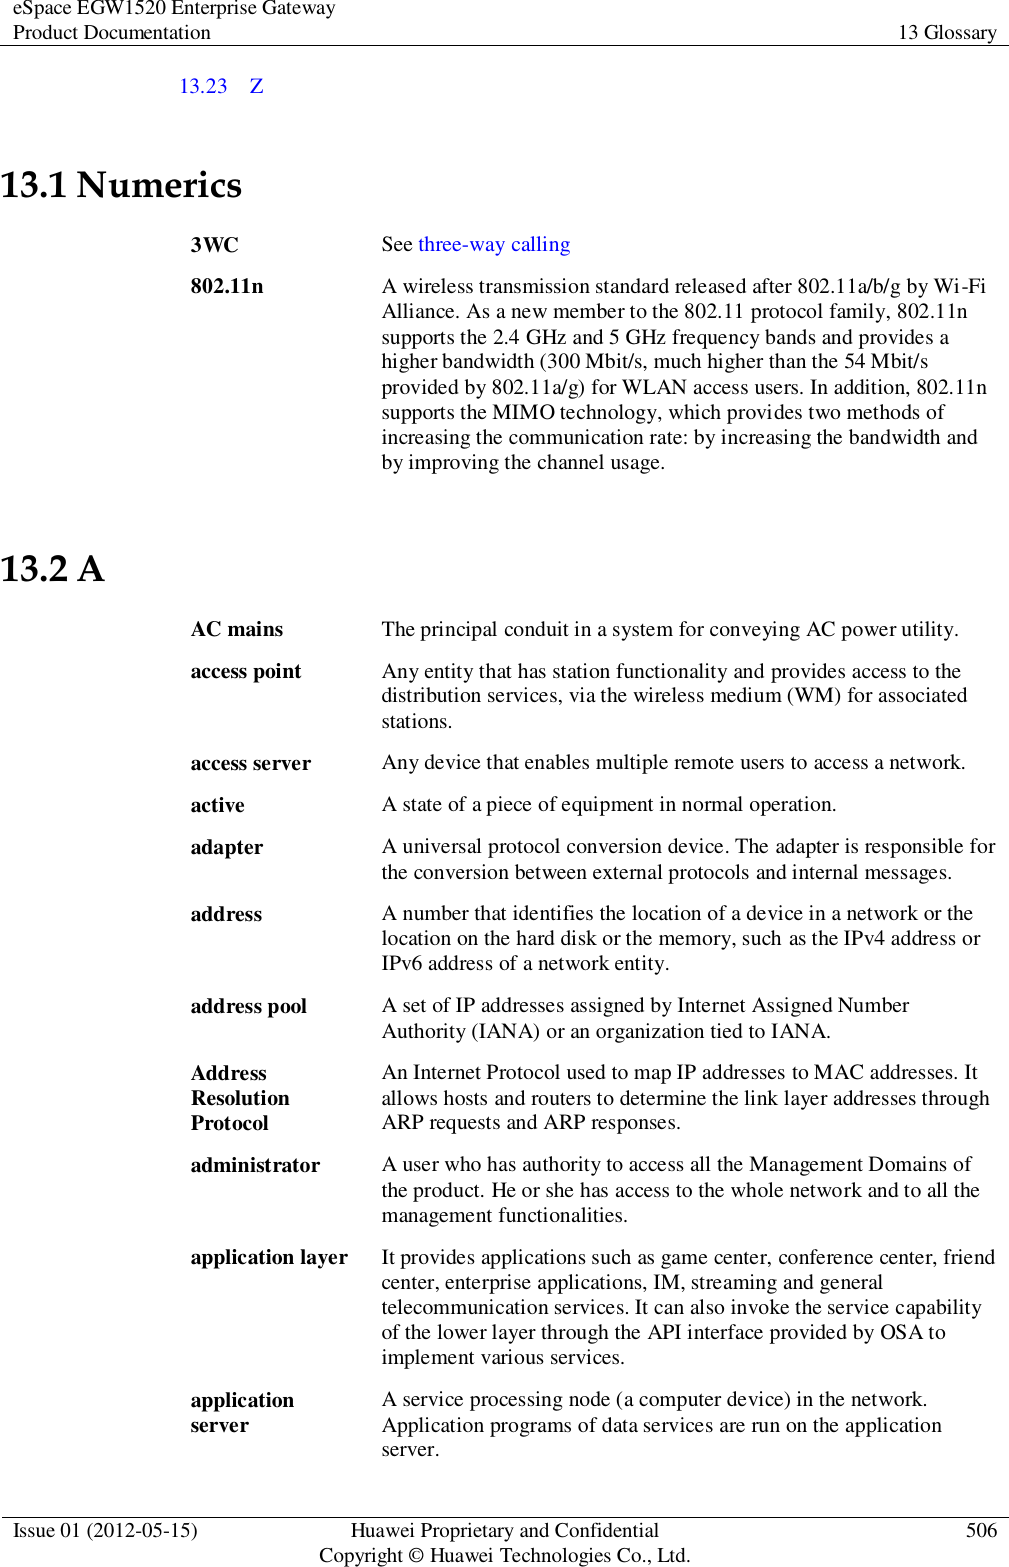 eSpace EGW1520 Enterprise Gateway Product Documentation 13 Glossary  Issue 01 (2012-05-15) Huawei Proprietary and Confidential                                     Copyright © Huawei Technologies Co., Ltd. 506  13.23    Z 13.1 Numerics 3WC See three-way calling 802.11n A wireless transmission standard released after 802.11a/b/g by Wi-Fi Alliance. As a new member to the 802.11 protocol family, 802.11n supports the 2.4 GHz and 5 GHz frequency bands and provides a higher bandwidth (300 Mbit/s, much higher than the 54 Mbit/s provided by 802.11a/g) for WLAN access users. In addition, 802.11n supports the MIMO technology, which provides two methods of increasing the communication rate: by increasing the bandwidth and by improving the channel usage. 13.2 A AC mains The principal conduit in a system for conveying AC power utility. access point Any entity that has station functionality and provides access to the distribution services, via the wireless medium (WM) for associated stations. access server Any device that enables multiple remote users to access a network. active A state of a piece of equipment in normal operation. adapter A universal protocol conversion device. The adapter is responsible for the conversion between external protocols and internal messages. address A number that identifies the location of a device in a network or the location on the hard disk or the memory, such as the IPv4 address or IPv6 address of a network entity. address pool A set of IP addresses assigned by Internet Assigned Number Authority (IANA) or an organization tied to IANA. Address Resolution Protocol An Internet Protocol used to map IP addresses to MAC addresses. It allows hosts and routers to determine the link layer addresses through ARP requests and ARP responses. administrator A user who has authority to access all the Management Domains of the product. He or she has access to the whole network and to all the management functionalities. application layer It provides applications such as game center, conference center, friend center, enterprise applications, IM, streaming and general telecommunication services. It can also invoke the service capability of the lower layer through the API interface provided by OSA to implement various services. application server A service processing node (a computer device) in the network. Application programs of data services are run on the application server. 